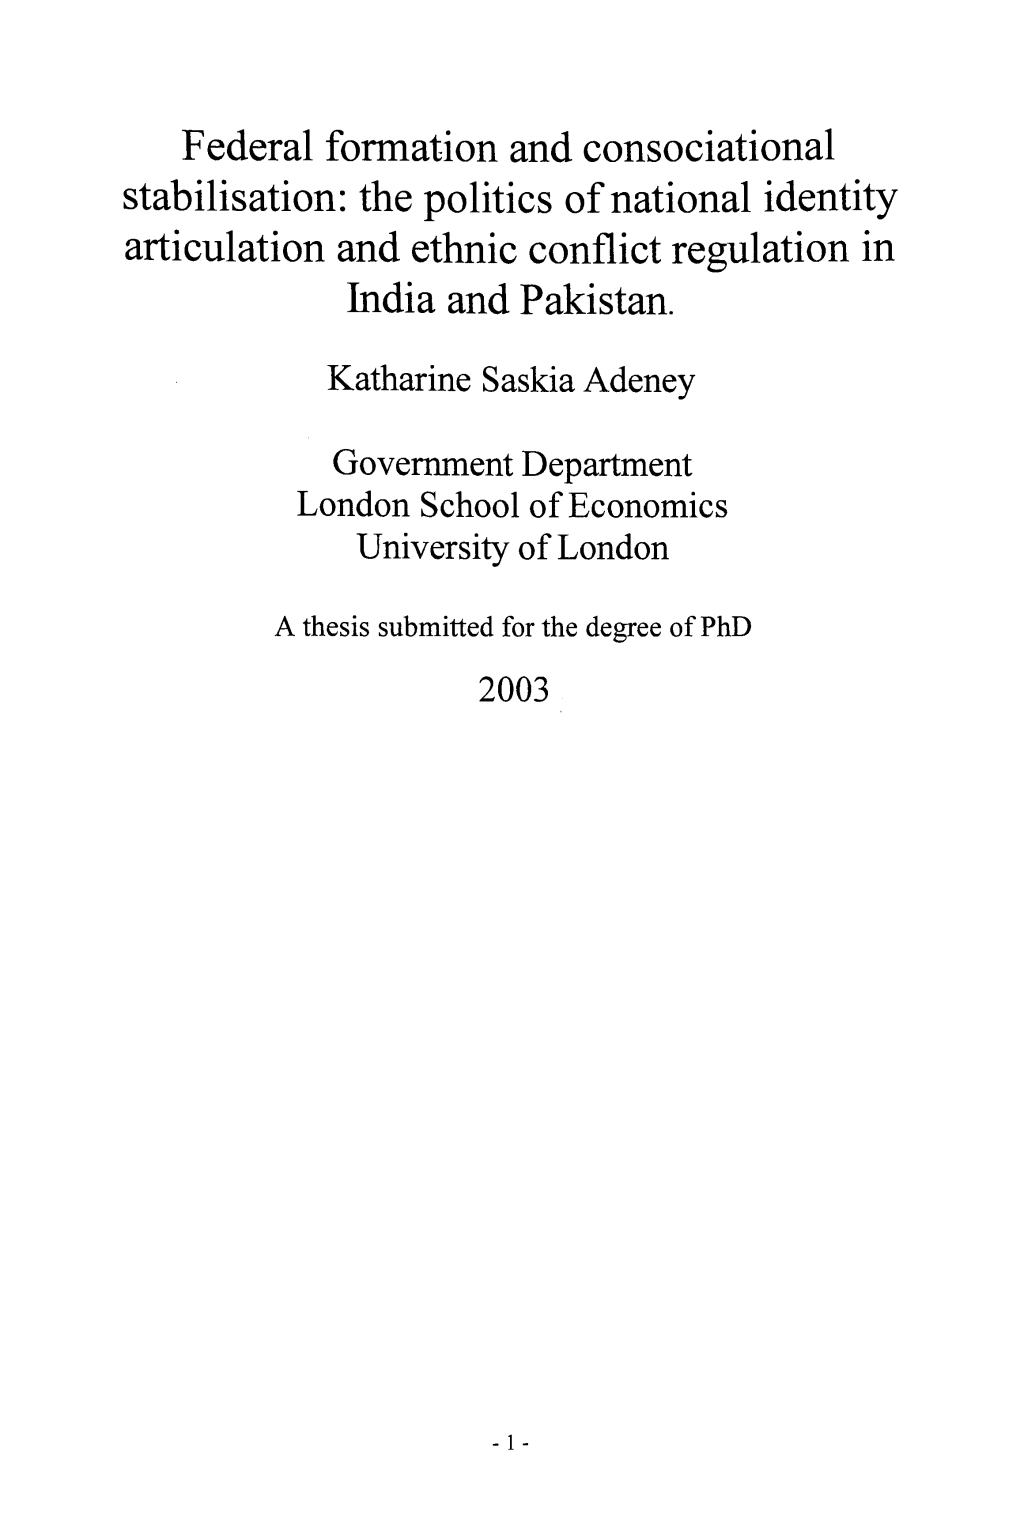 Federal Formation and Consociational Stabilisation: the Politics of National Identity Articulation and Ethnic Conflict Regulation in India and Pakistan